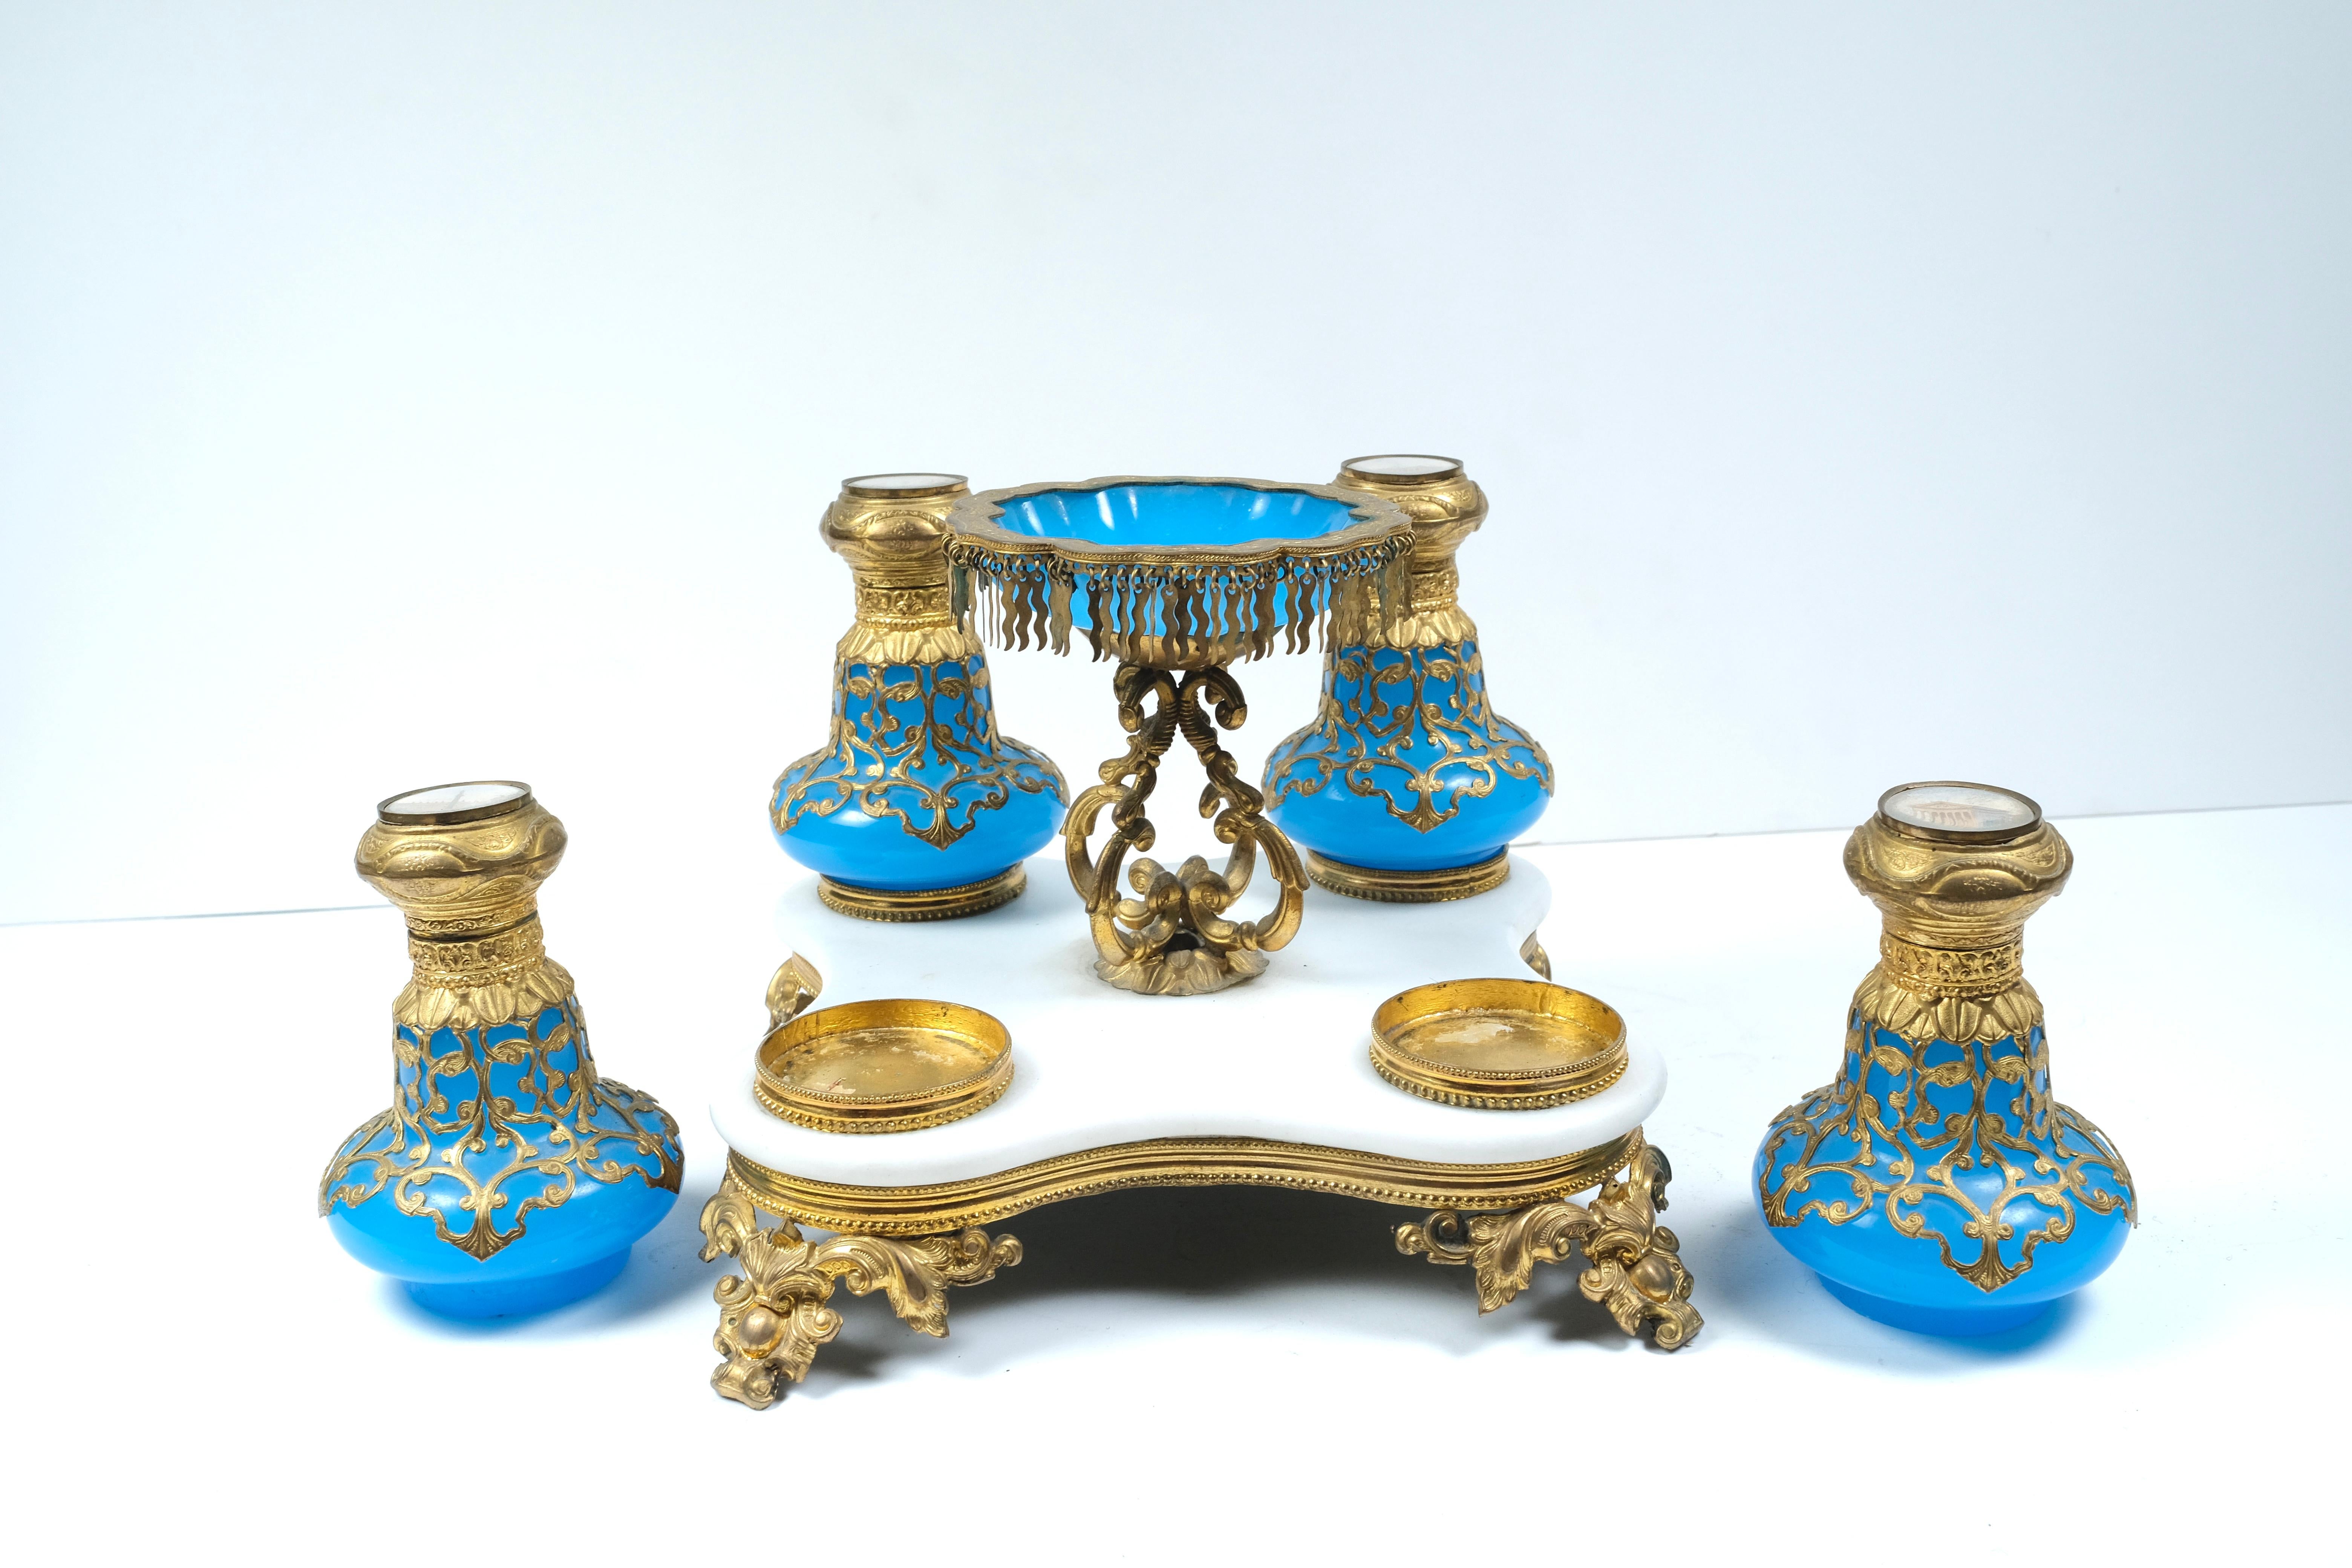 Rare. Dore bronze mounted opaline bottles with hand painted scenes. Bronze-mounted marble stand with ring dish. Very unusual.